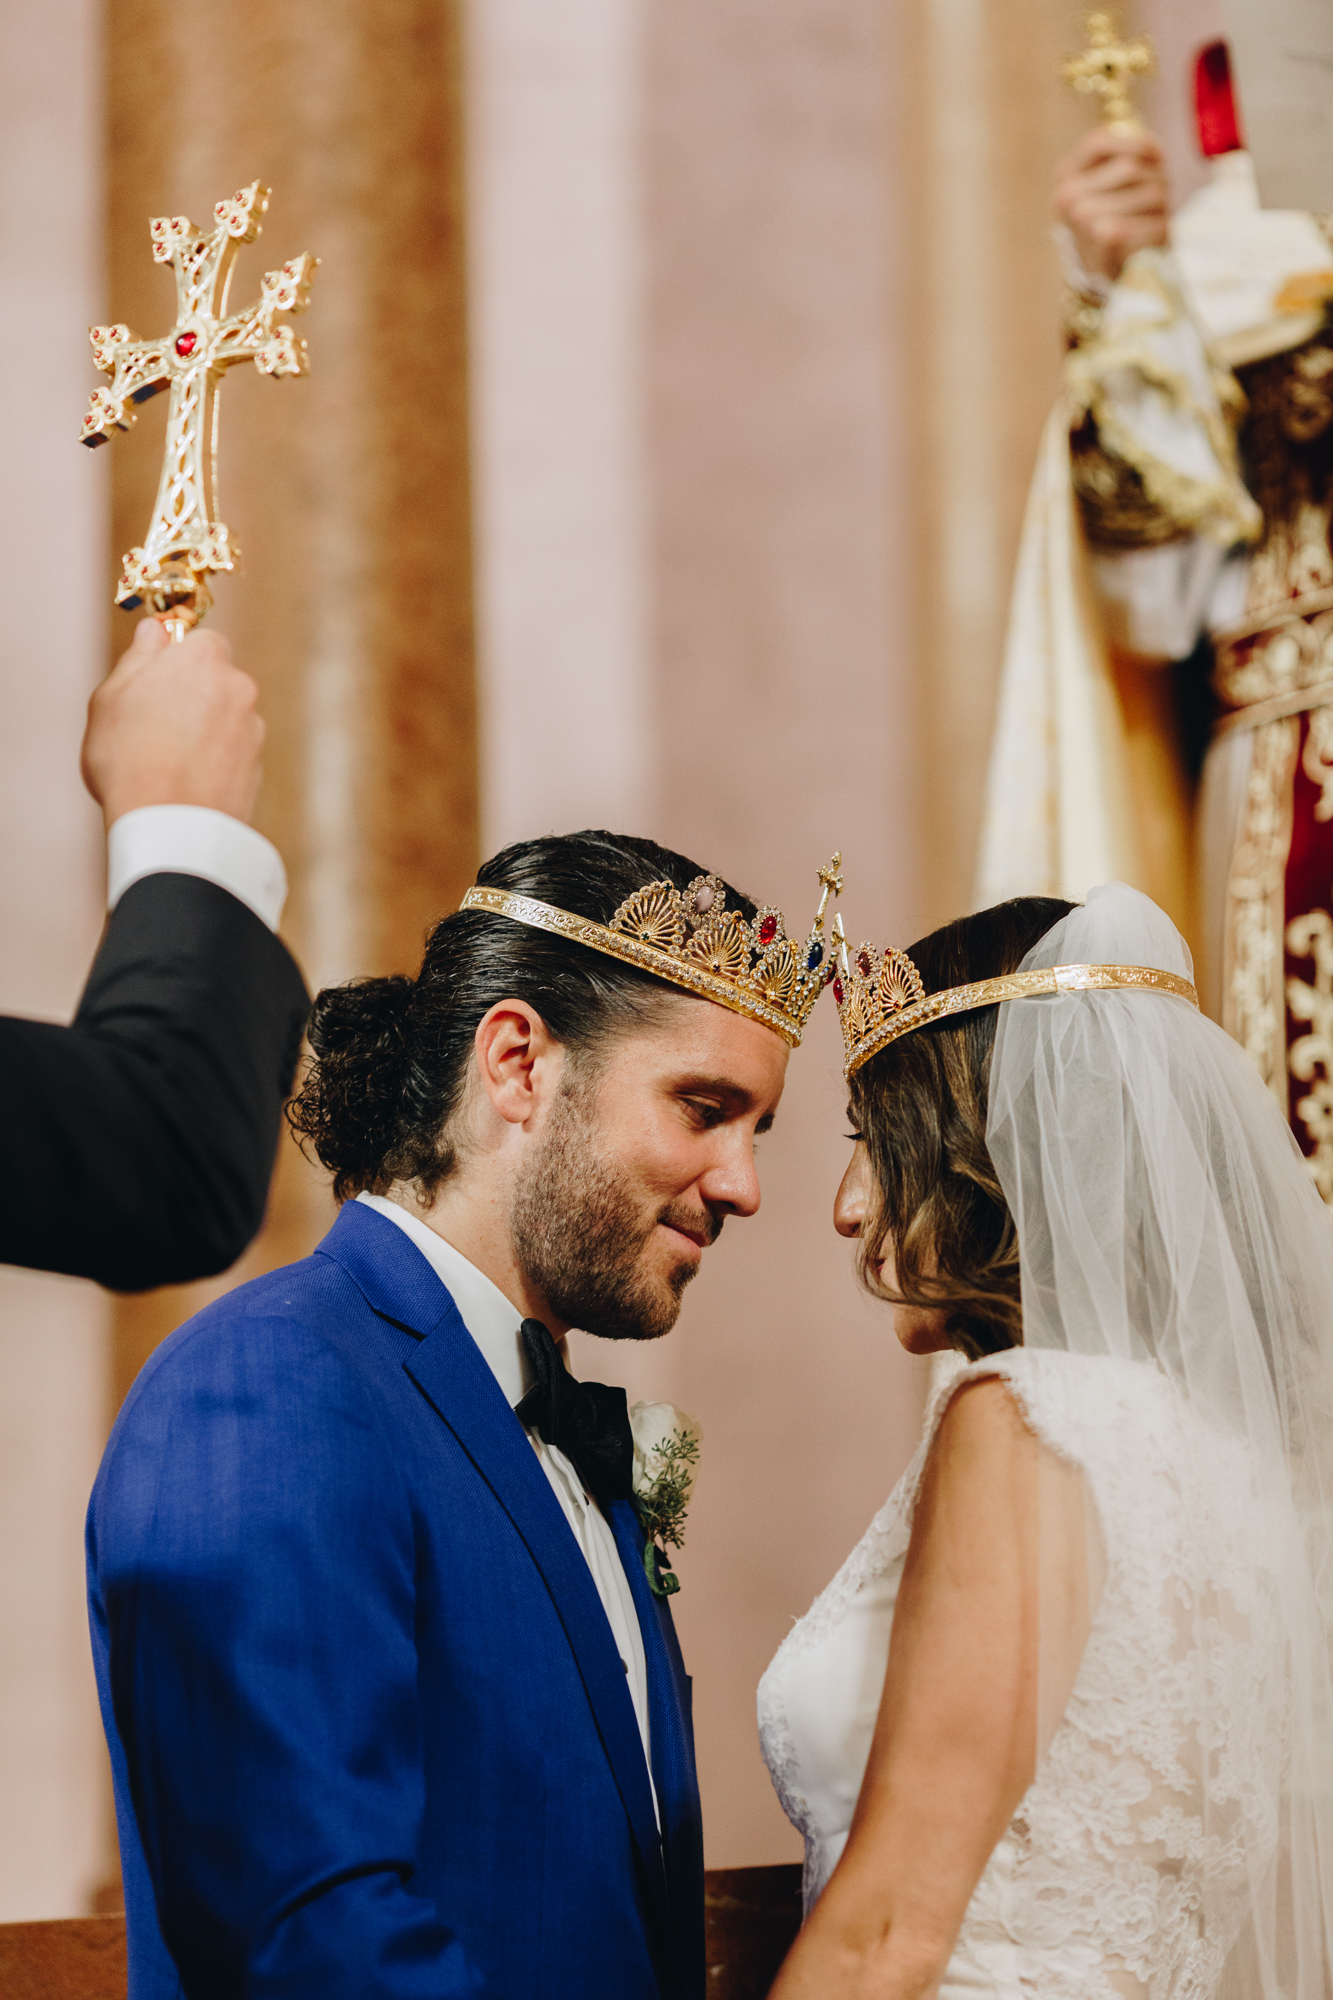 Crowning ceremony at Armenian Church in NYC